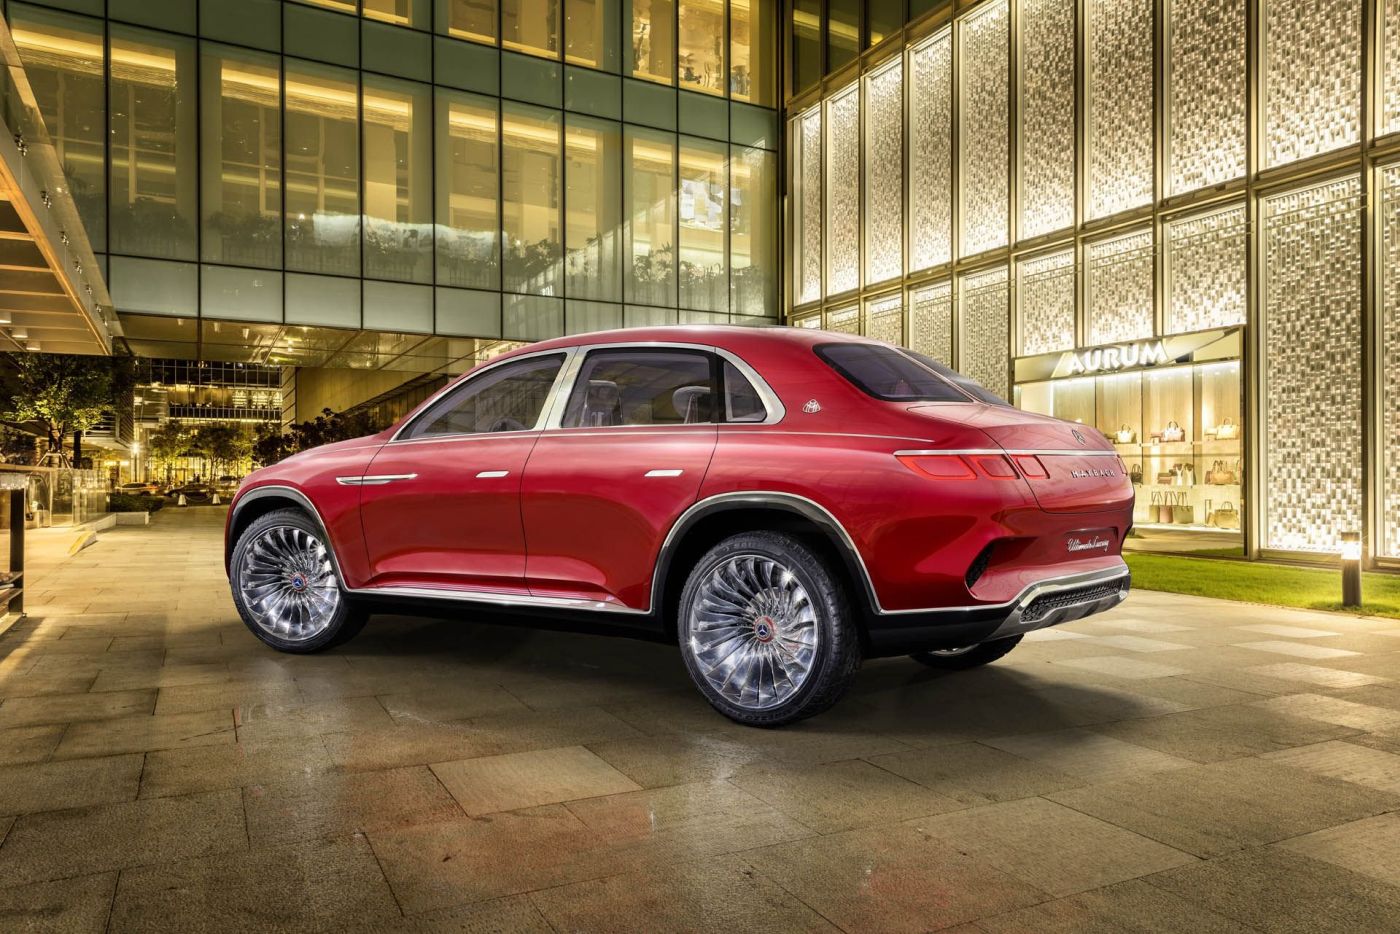 Vision-Mercedes-Maybach-Ultimate-Luxury-18